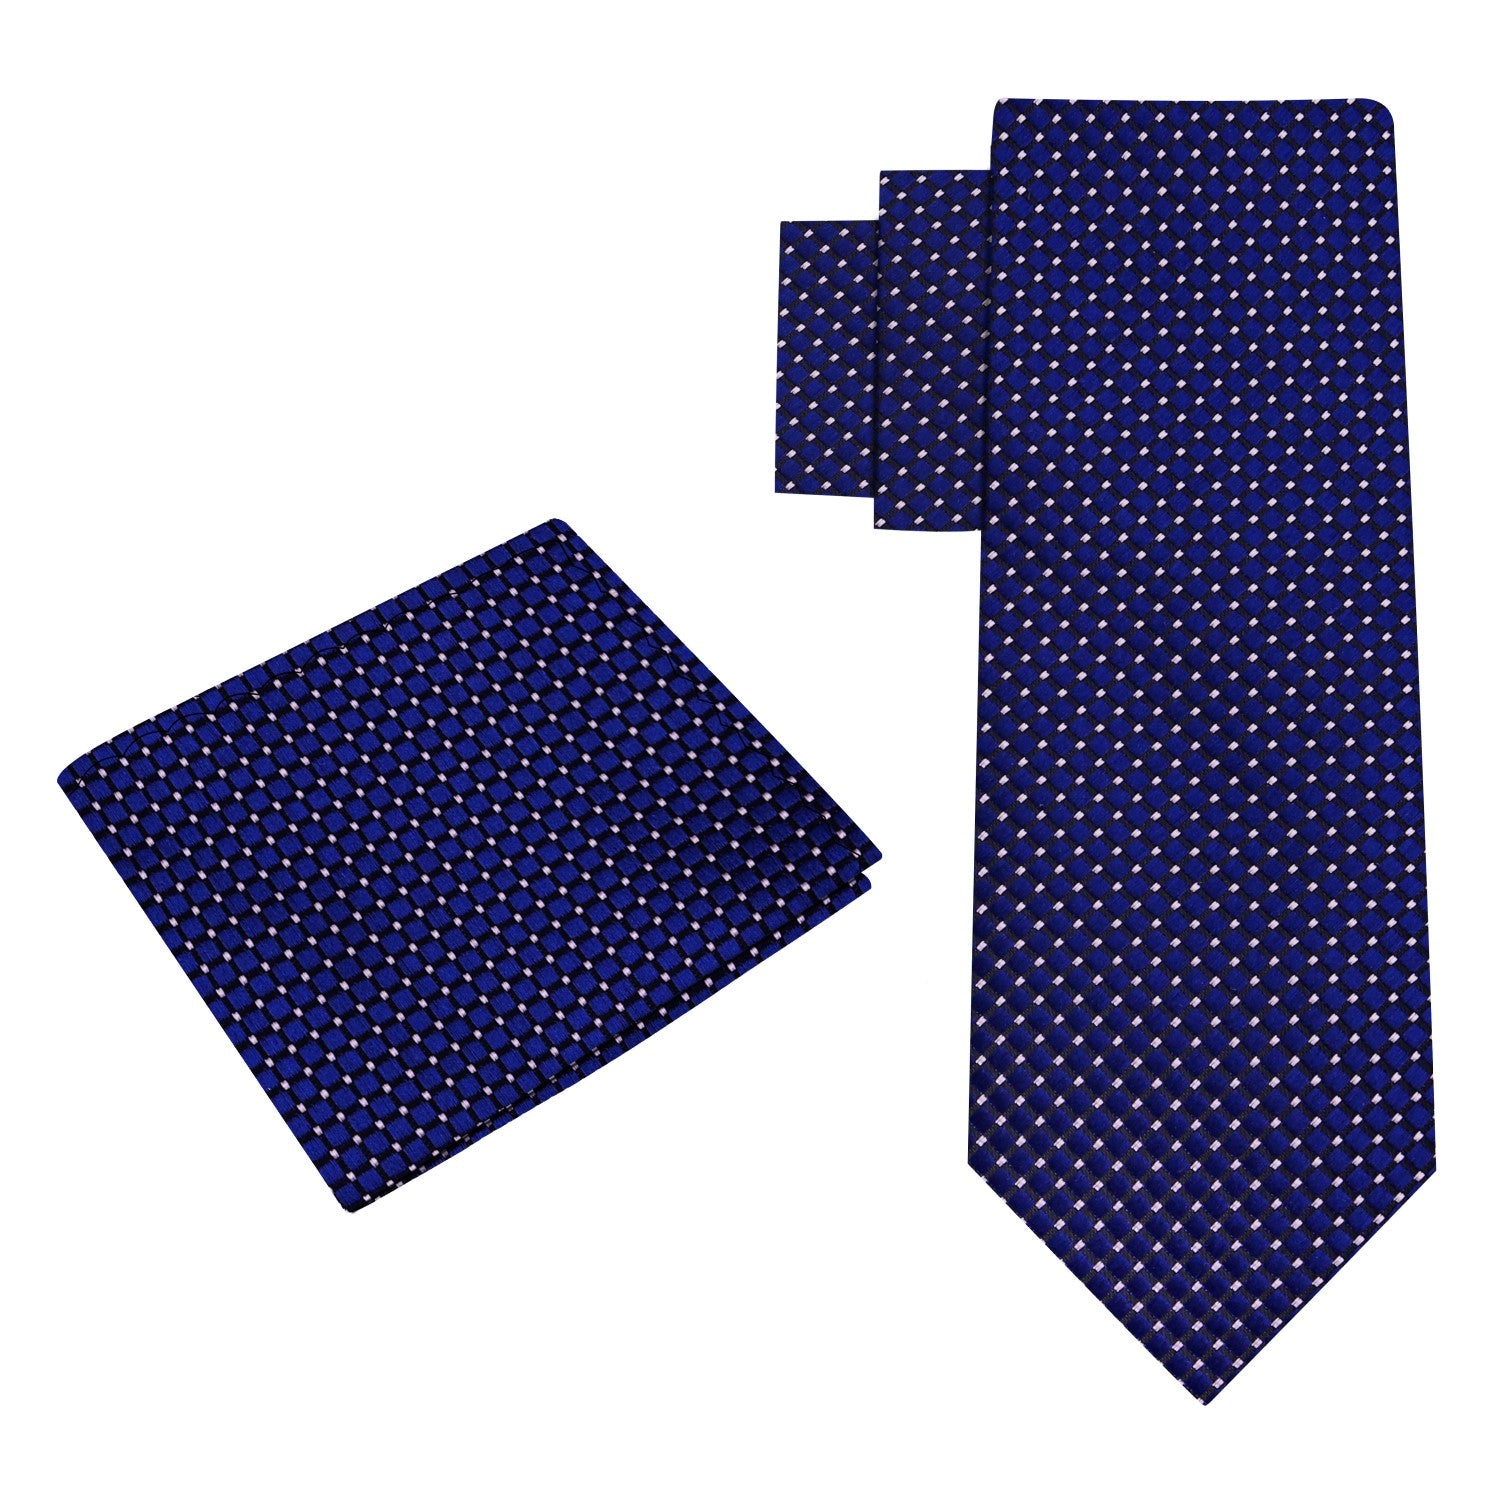 Alt View: Blue Geometric Tie and Square